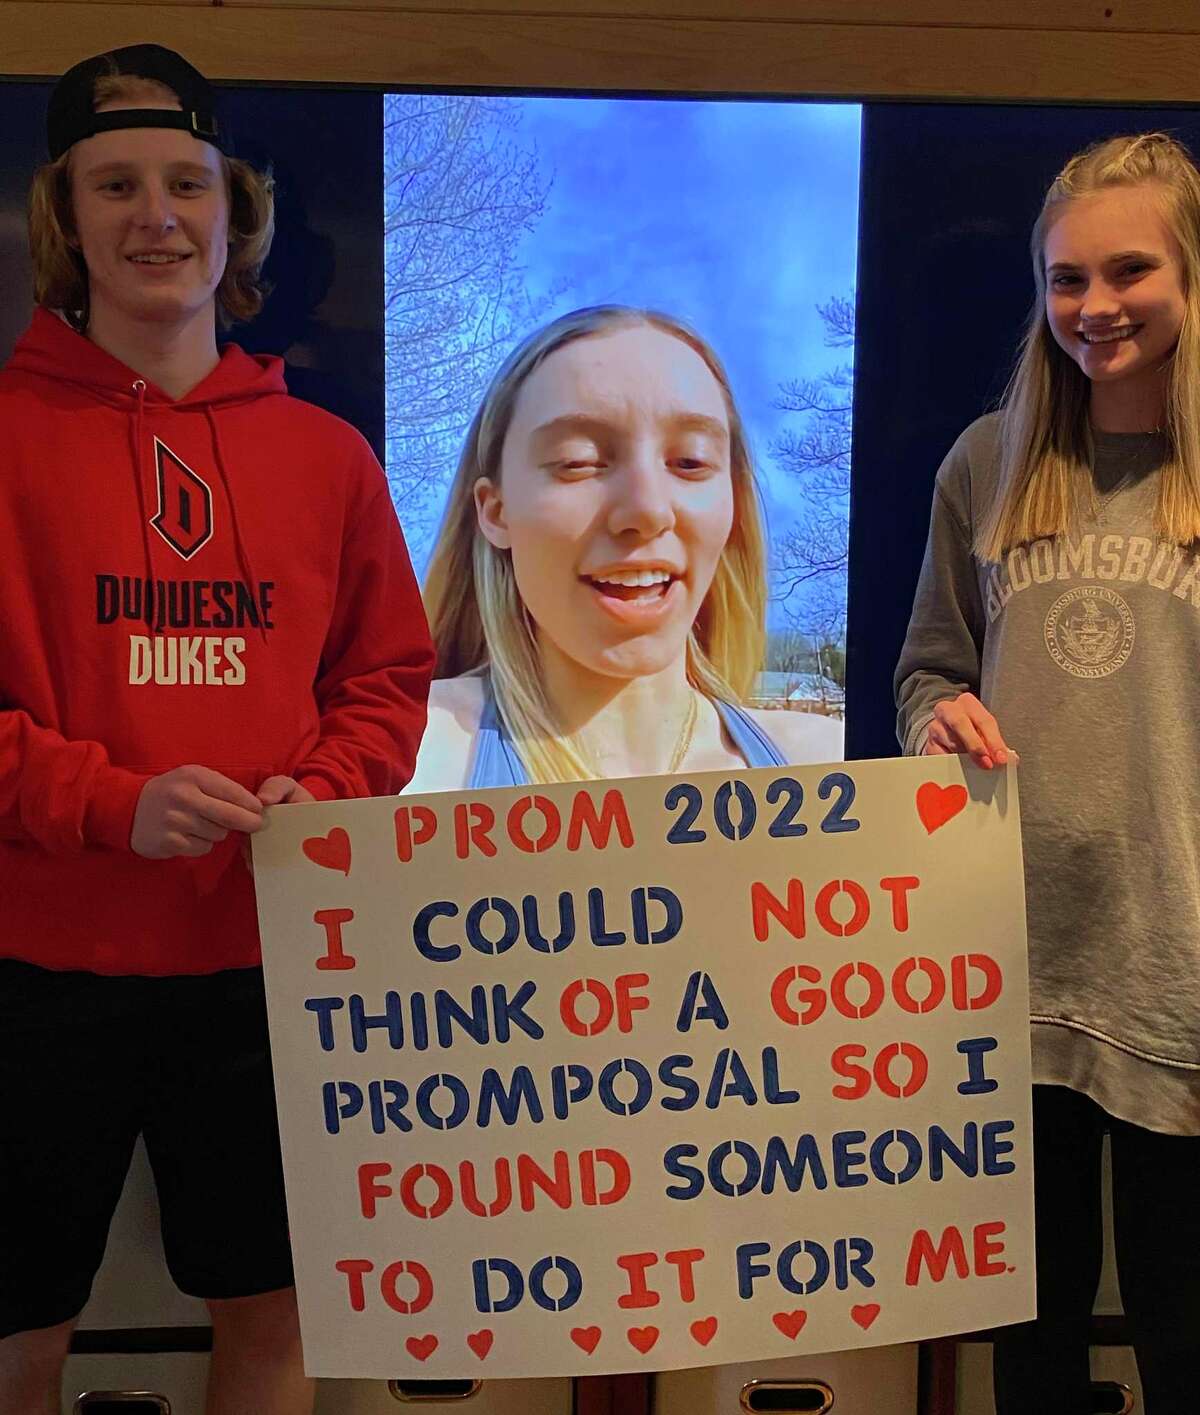 Sawyer Koretz reached out to UConn women’s basketball players Nika Muhl and Paige Bueckers for help asking his girlfriend to prom.